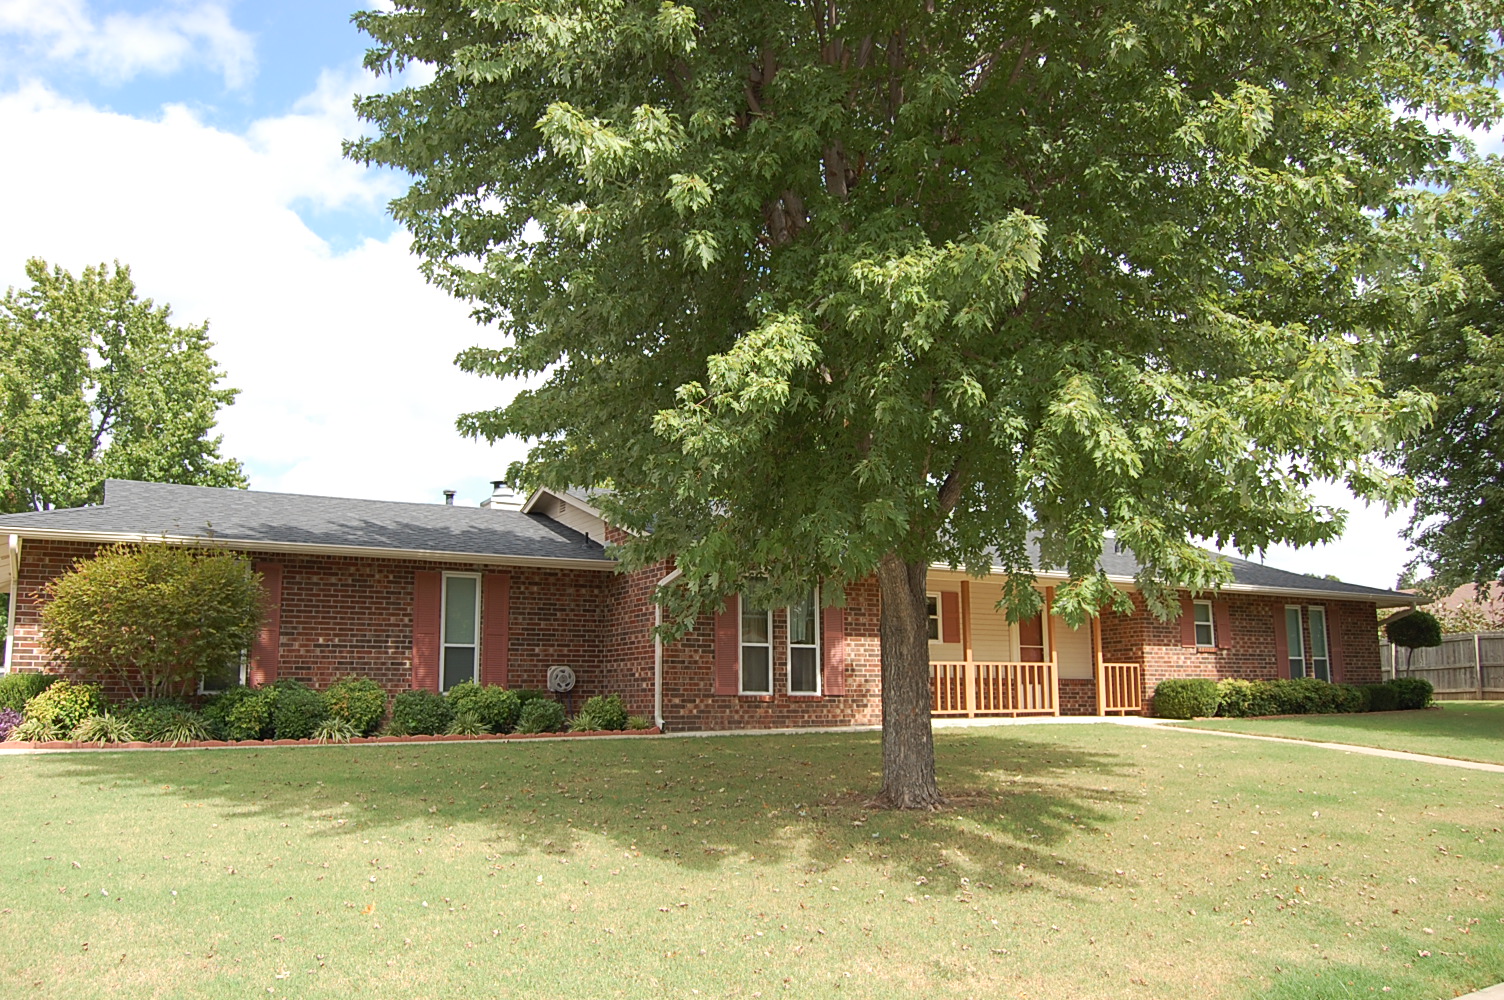 9701 Apple Gate Dr., Fort Smith, AR Main Image